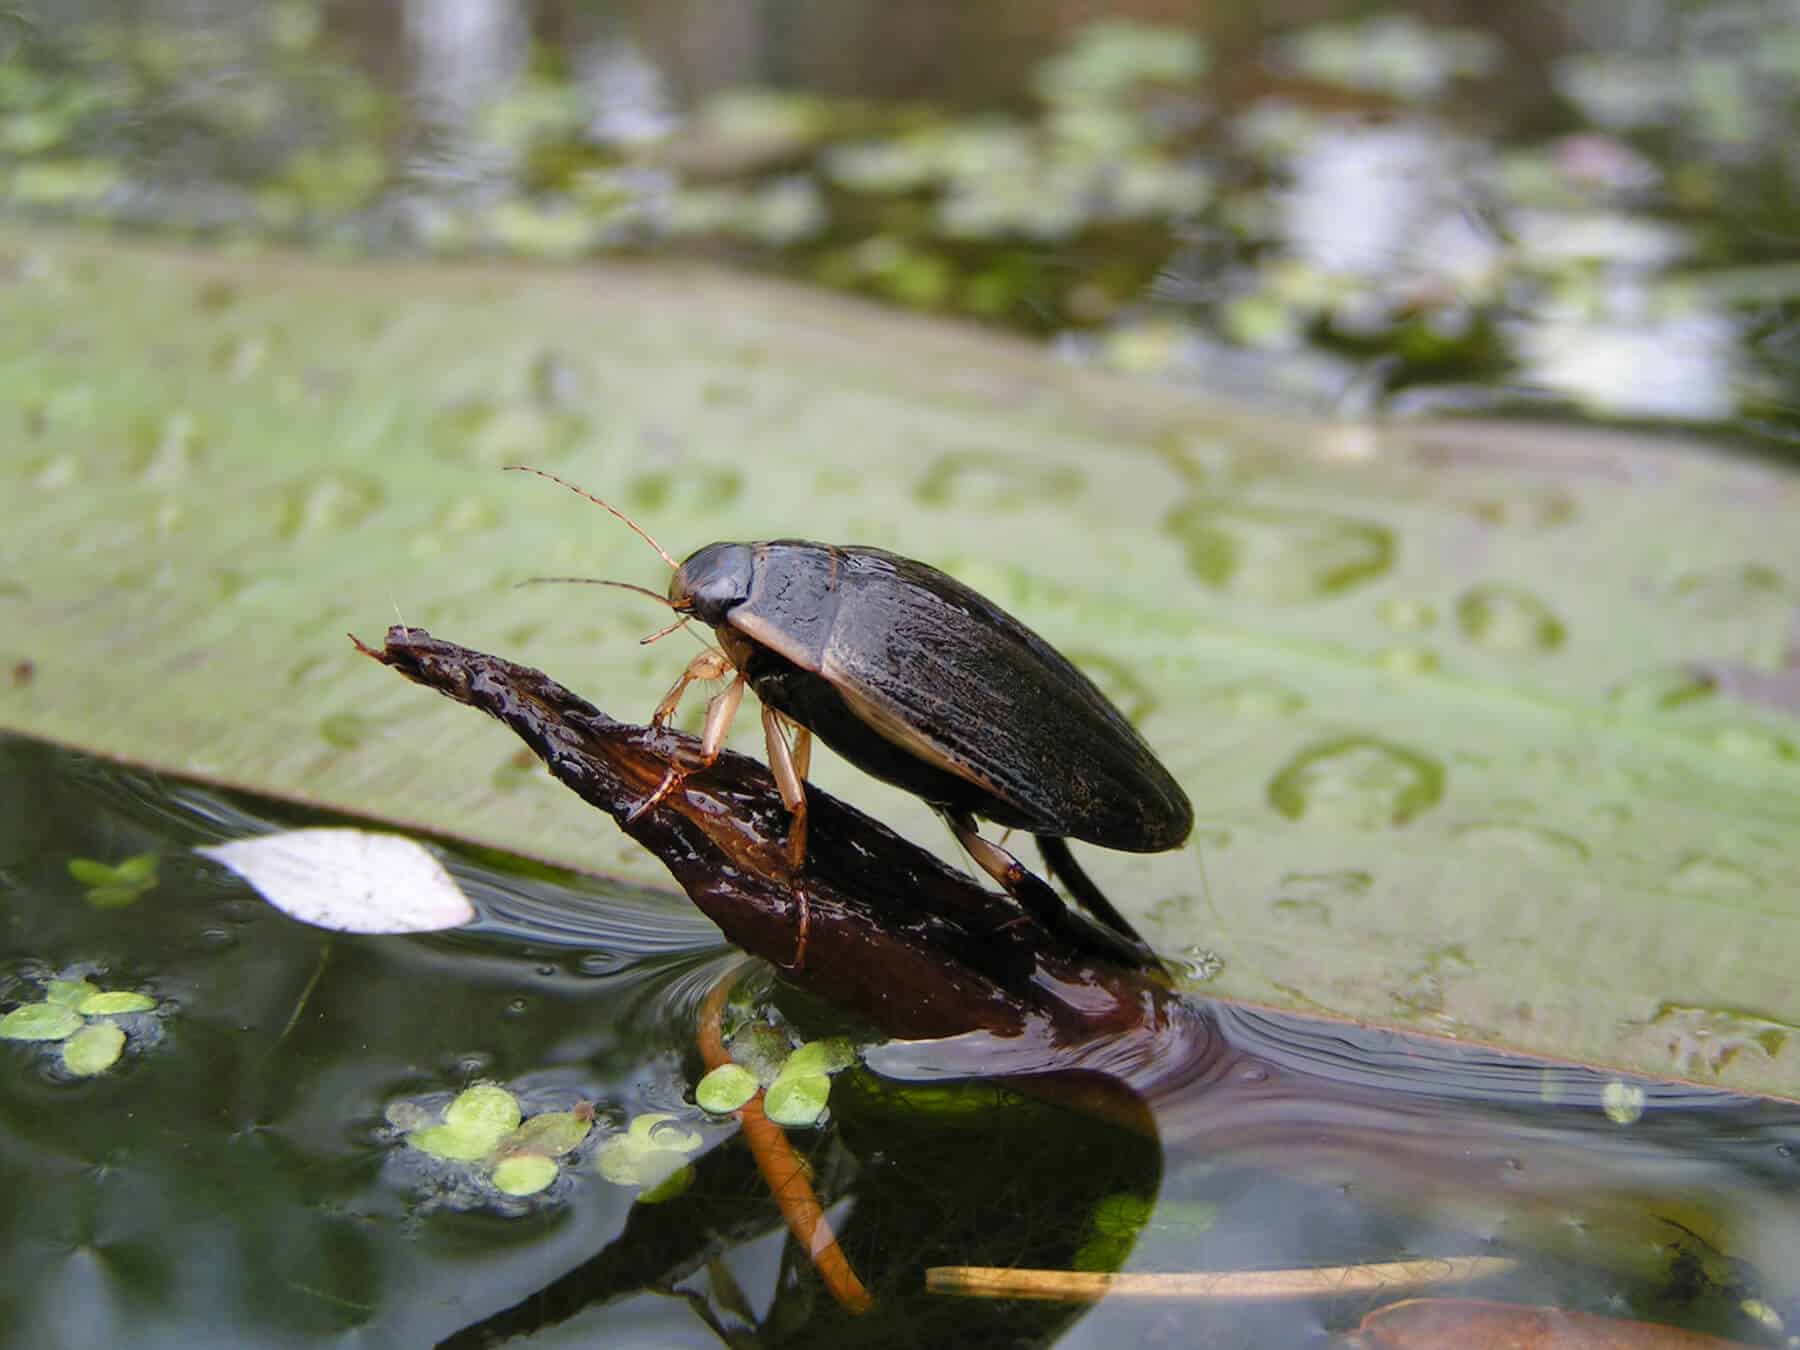 Diving beetle resting on a log